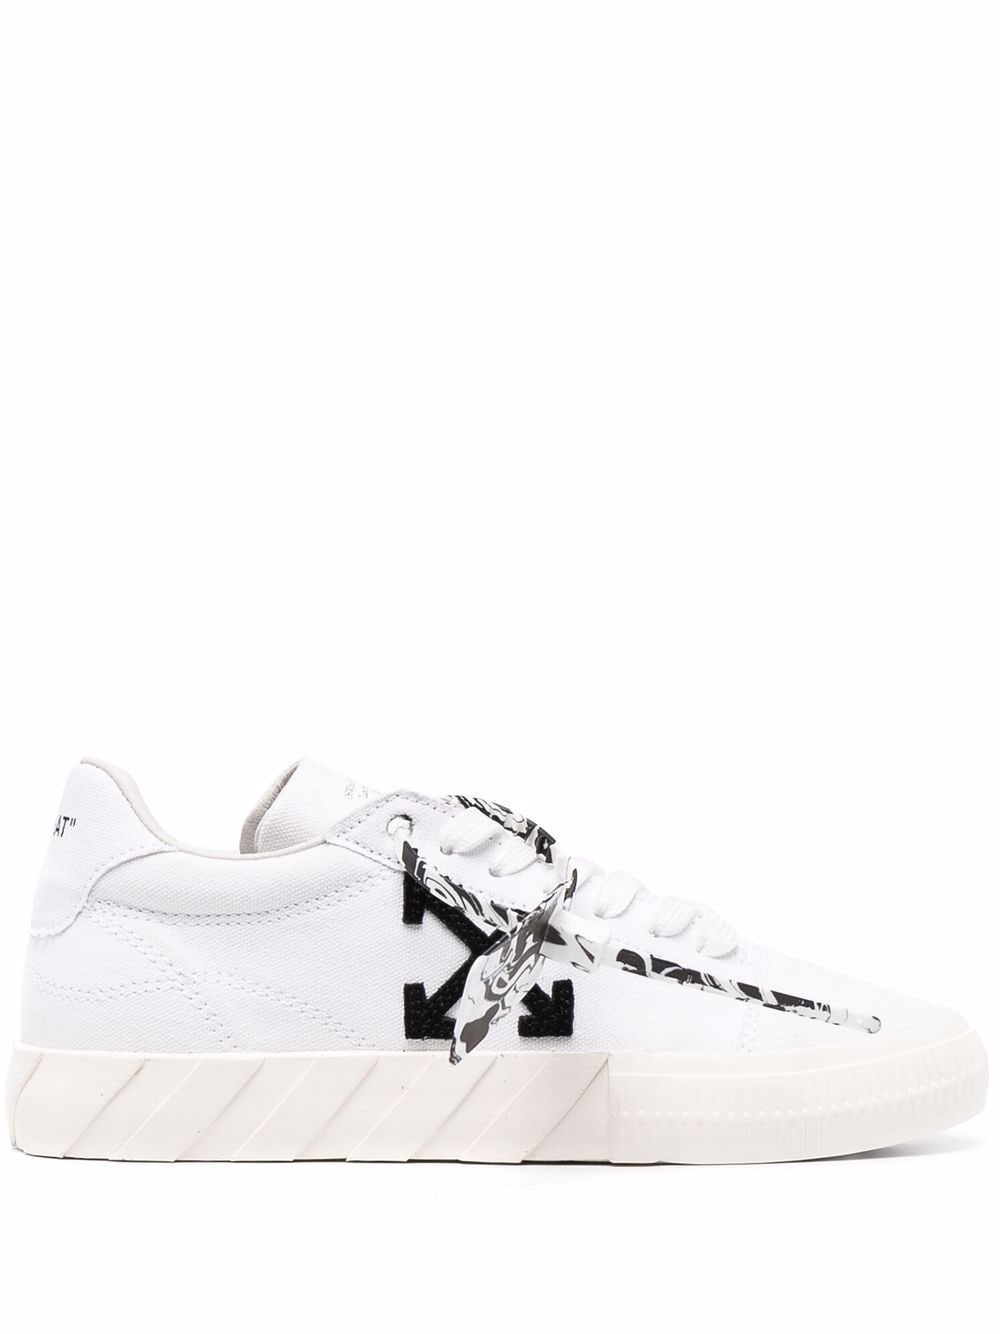 OFF-WHITE WOMEN Low Vulcanized Ego Canvas sneakers White/Black